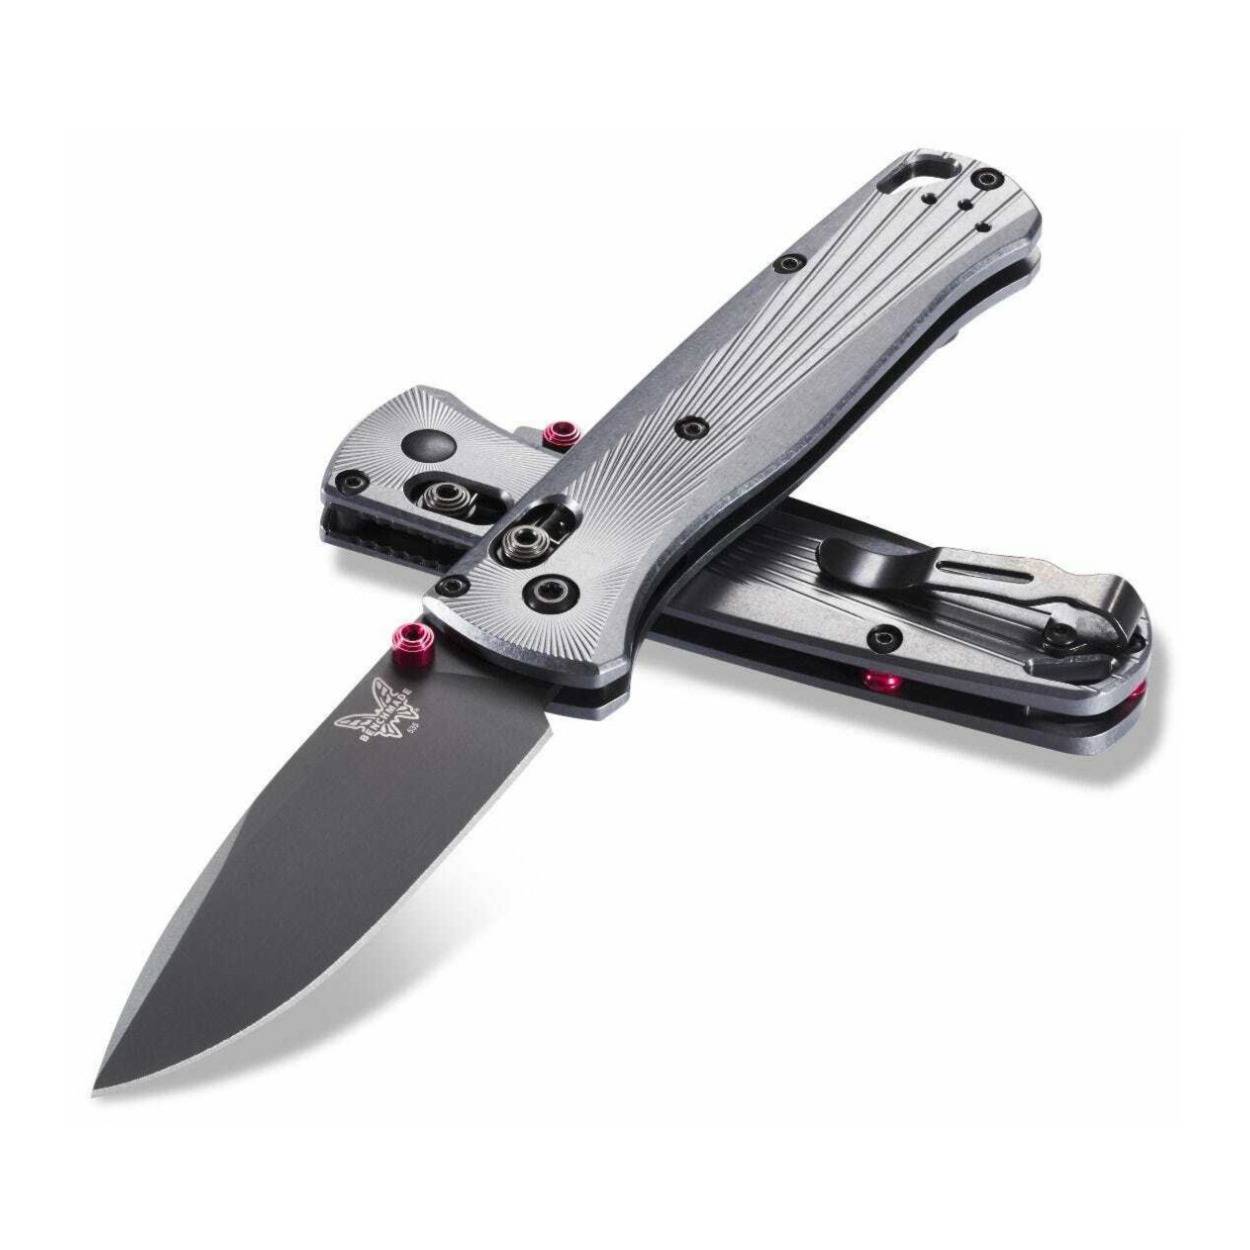 Benchmade Knives Sale: 34 Models 30% Off + Free s/h